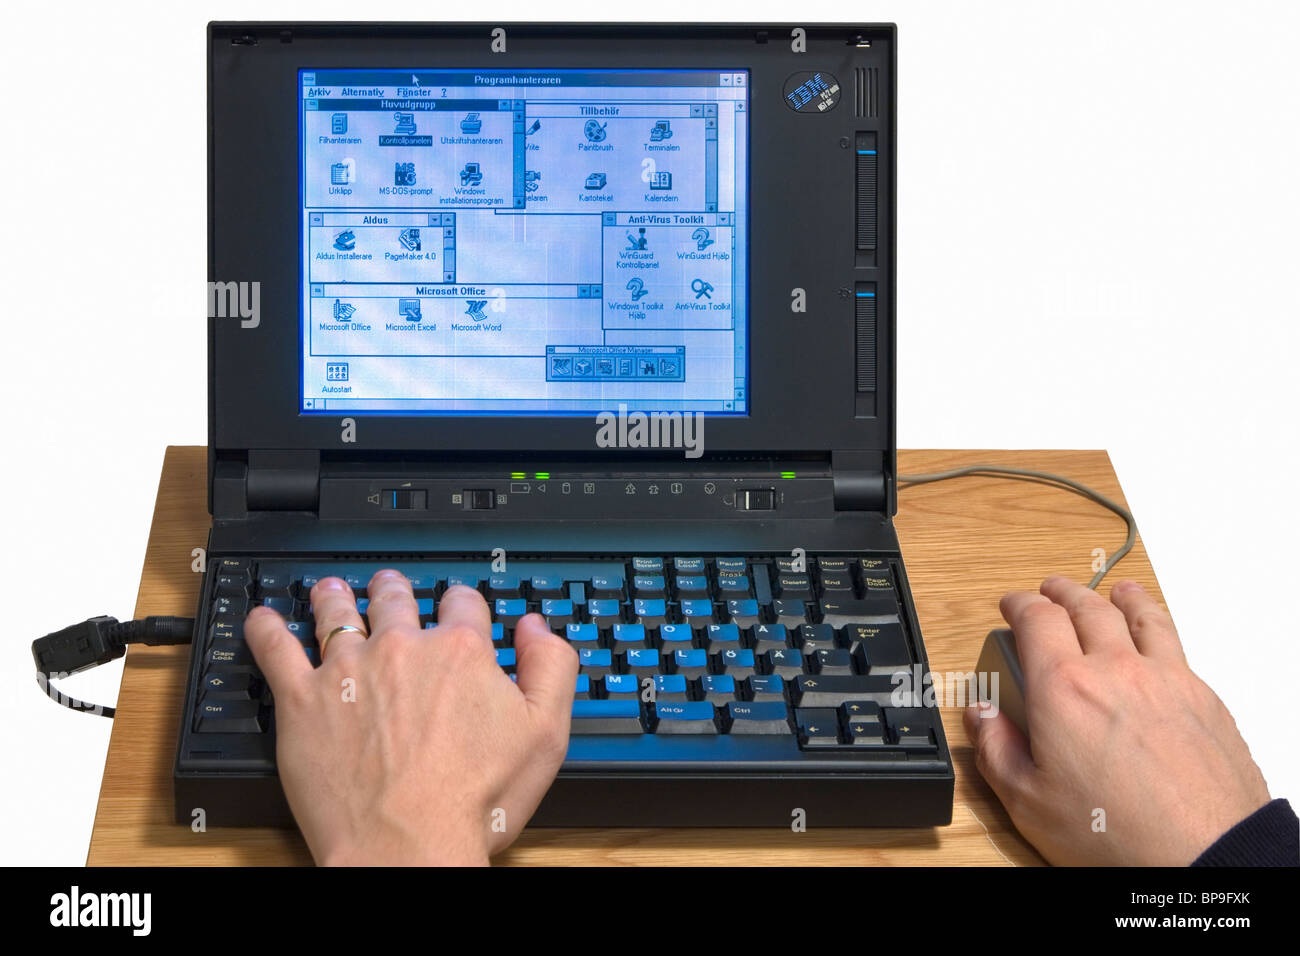 Old IBM PS/2 thinkpad running Windows 3.1, an old 16 bit operating system that needed another operiting system, DOS, to operate. Stock Photo